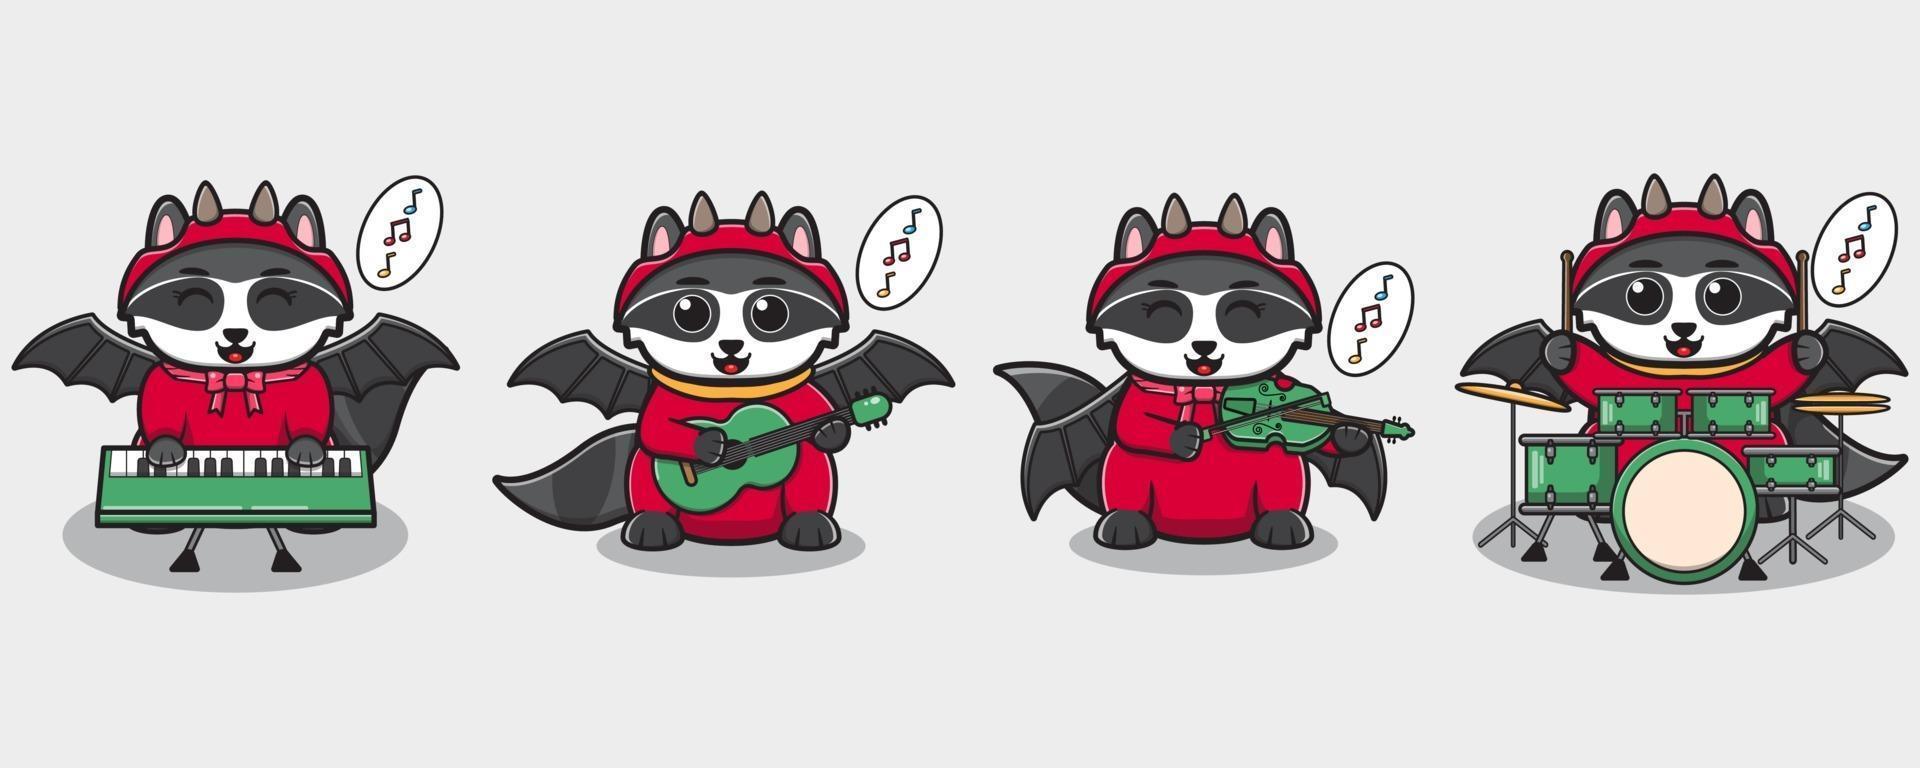 Raccoon with Devil costume play a musical instrument. vector